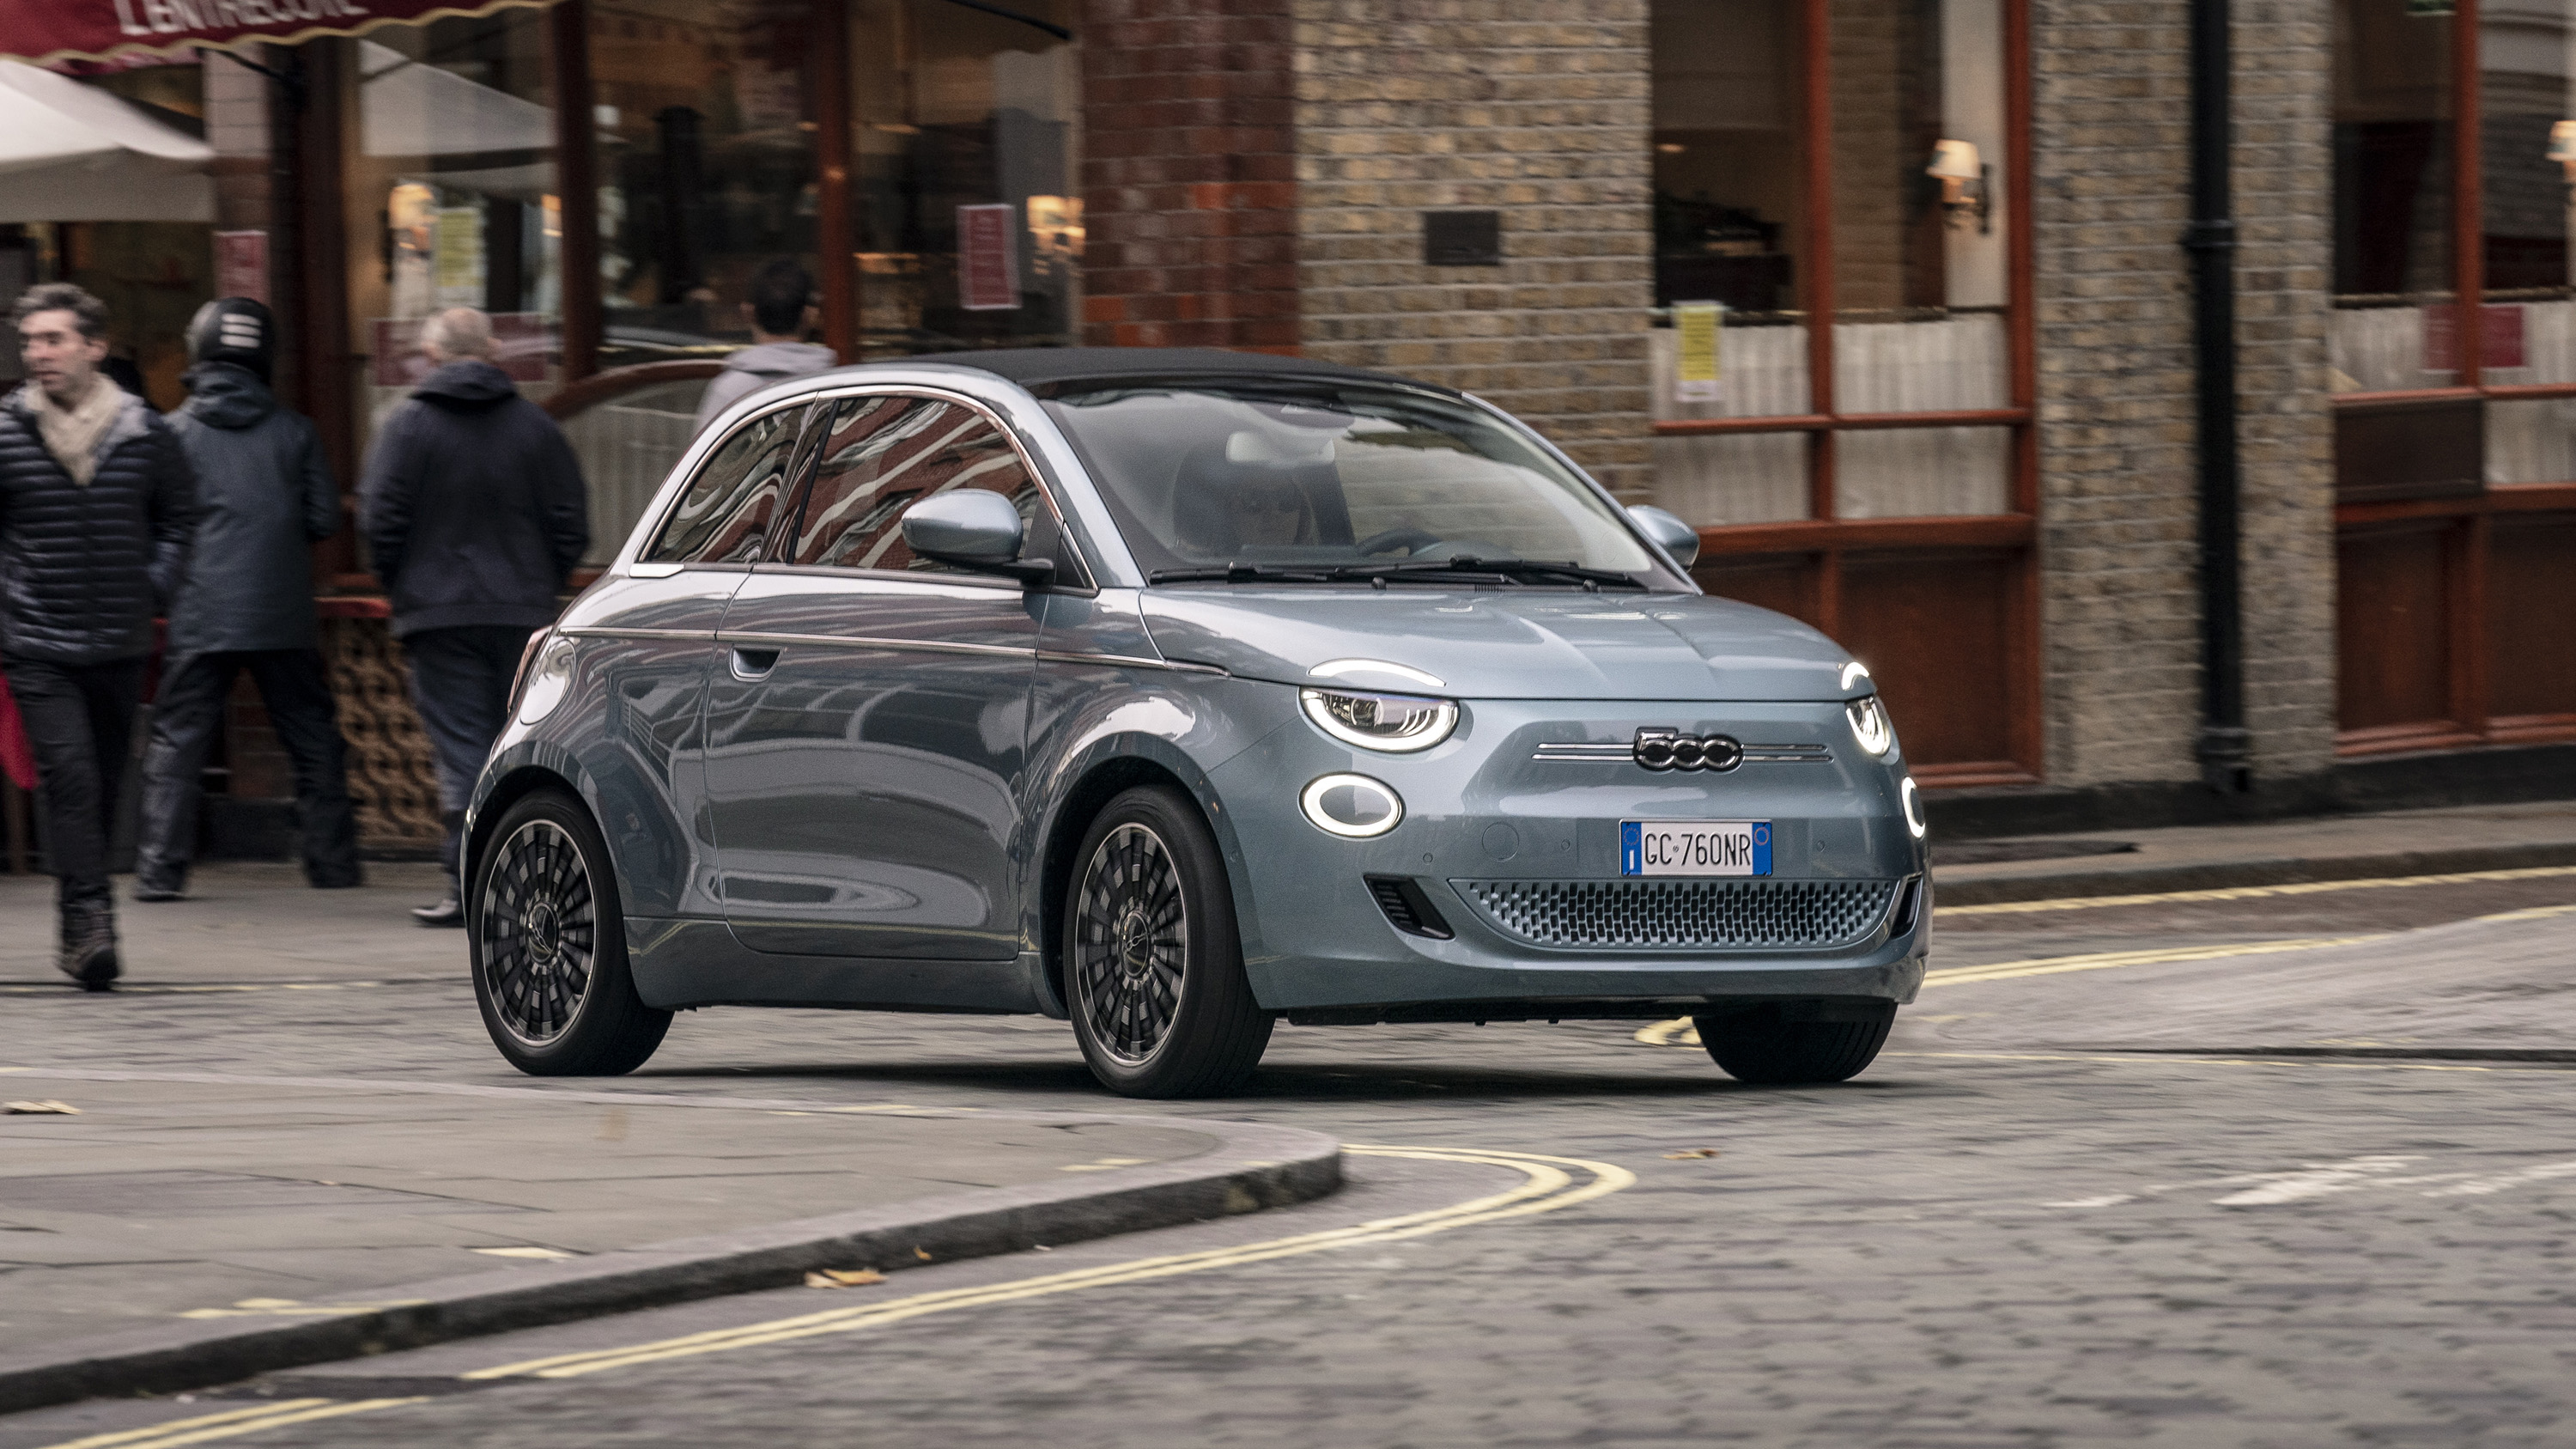 Fiat 500e Electric Car driving in the street